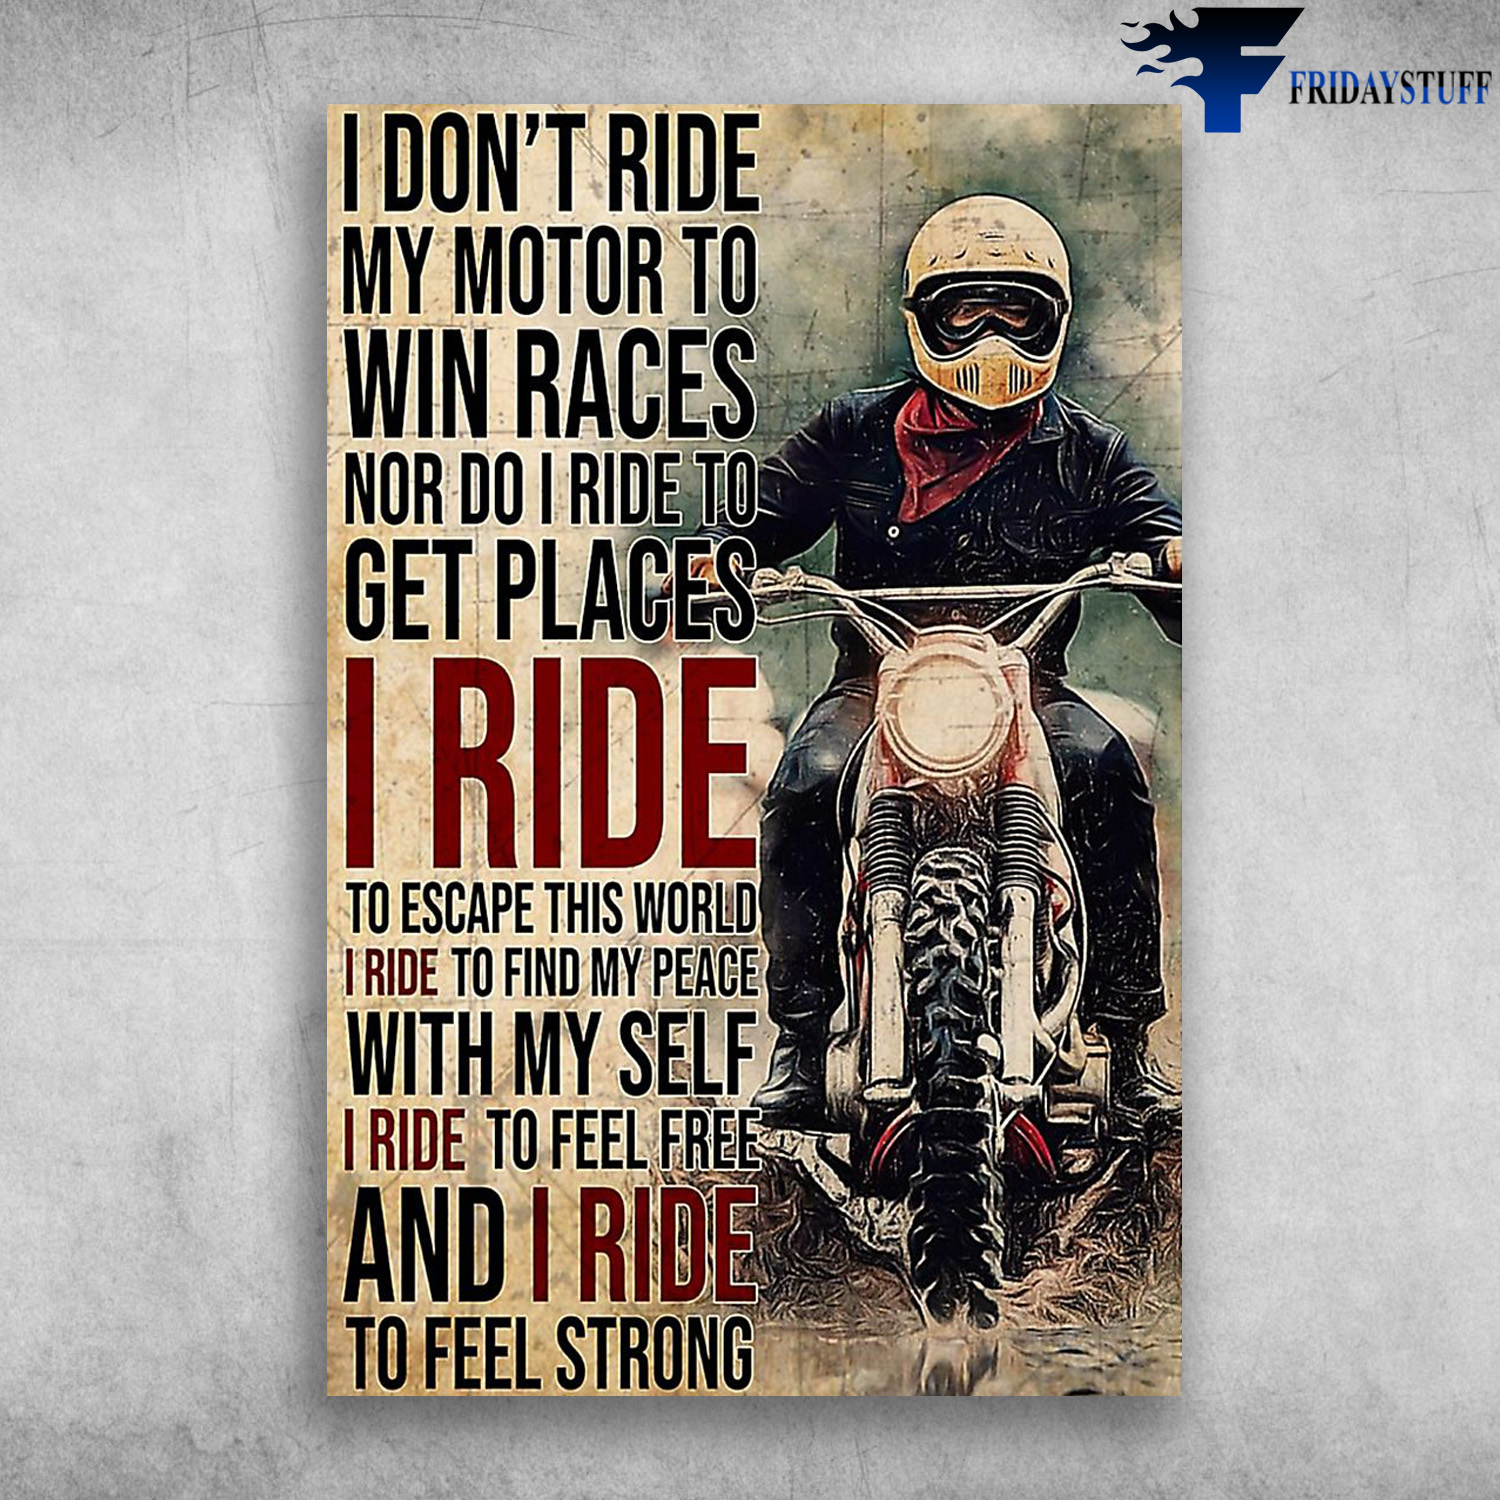 Man Riding Motorbike - I Don't Ride My Bike To Win Races, I Ride To Escape This World